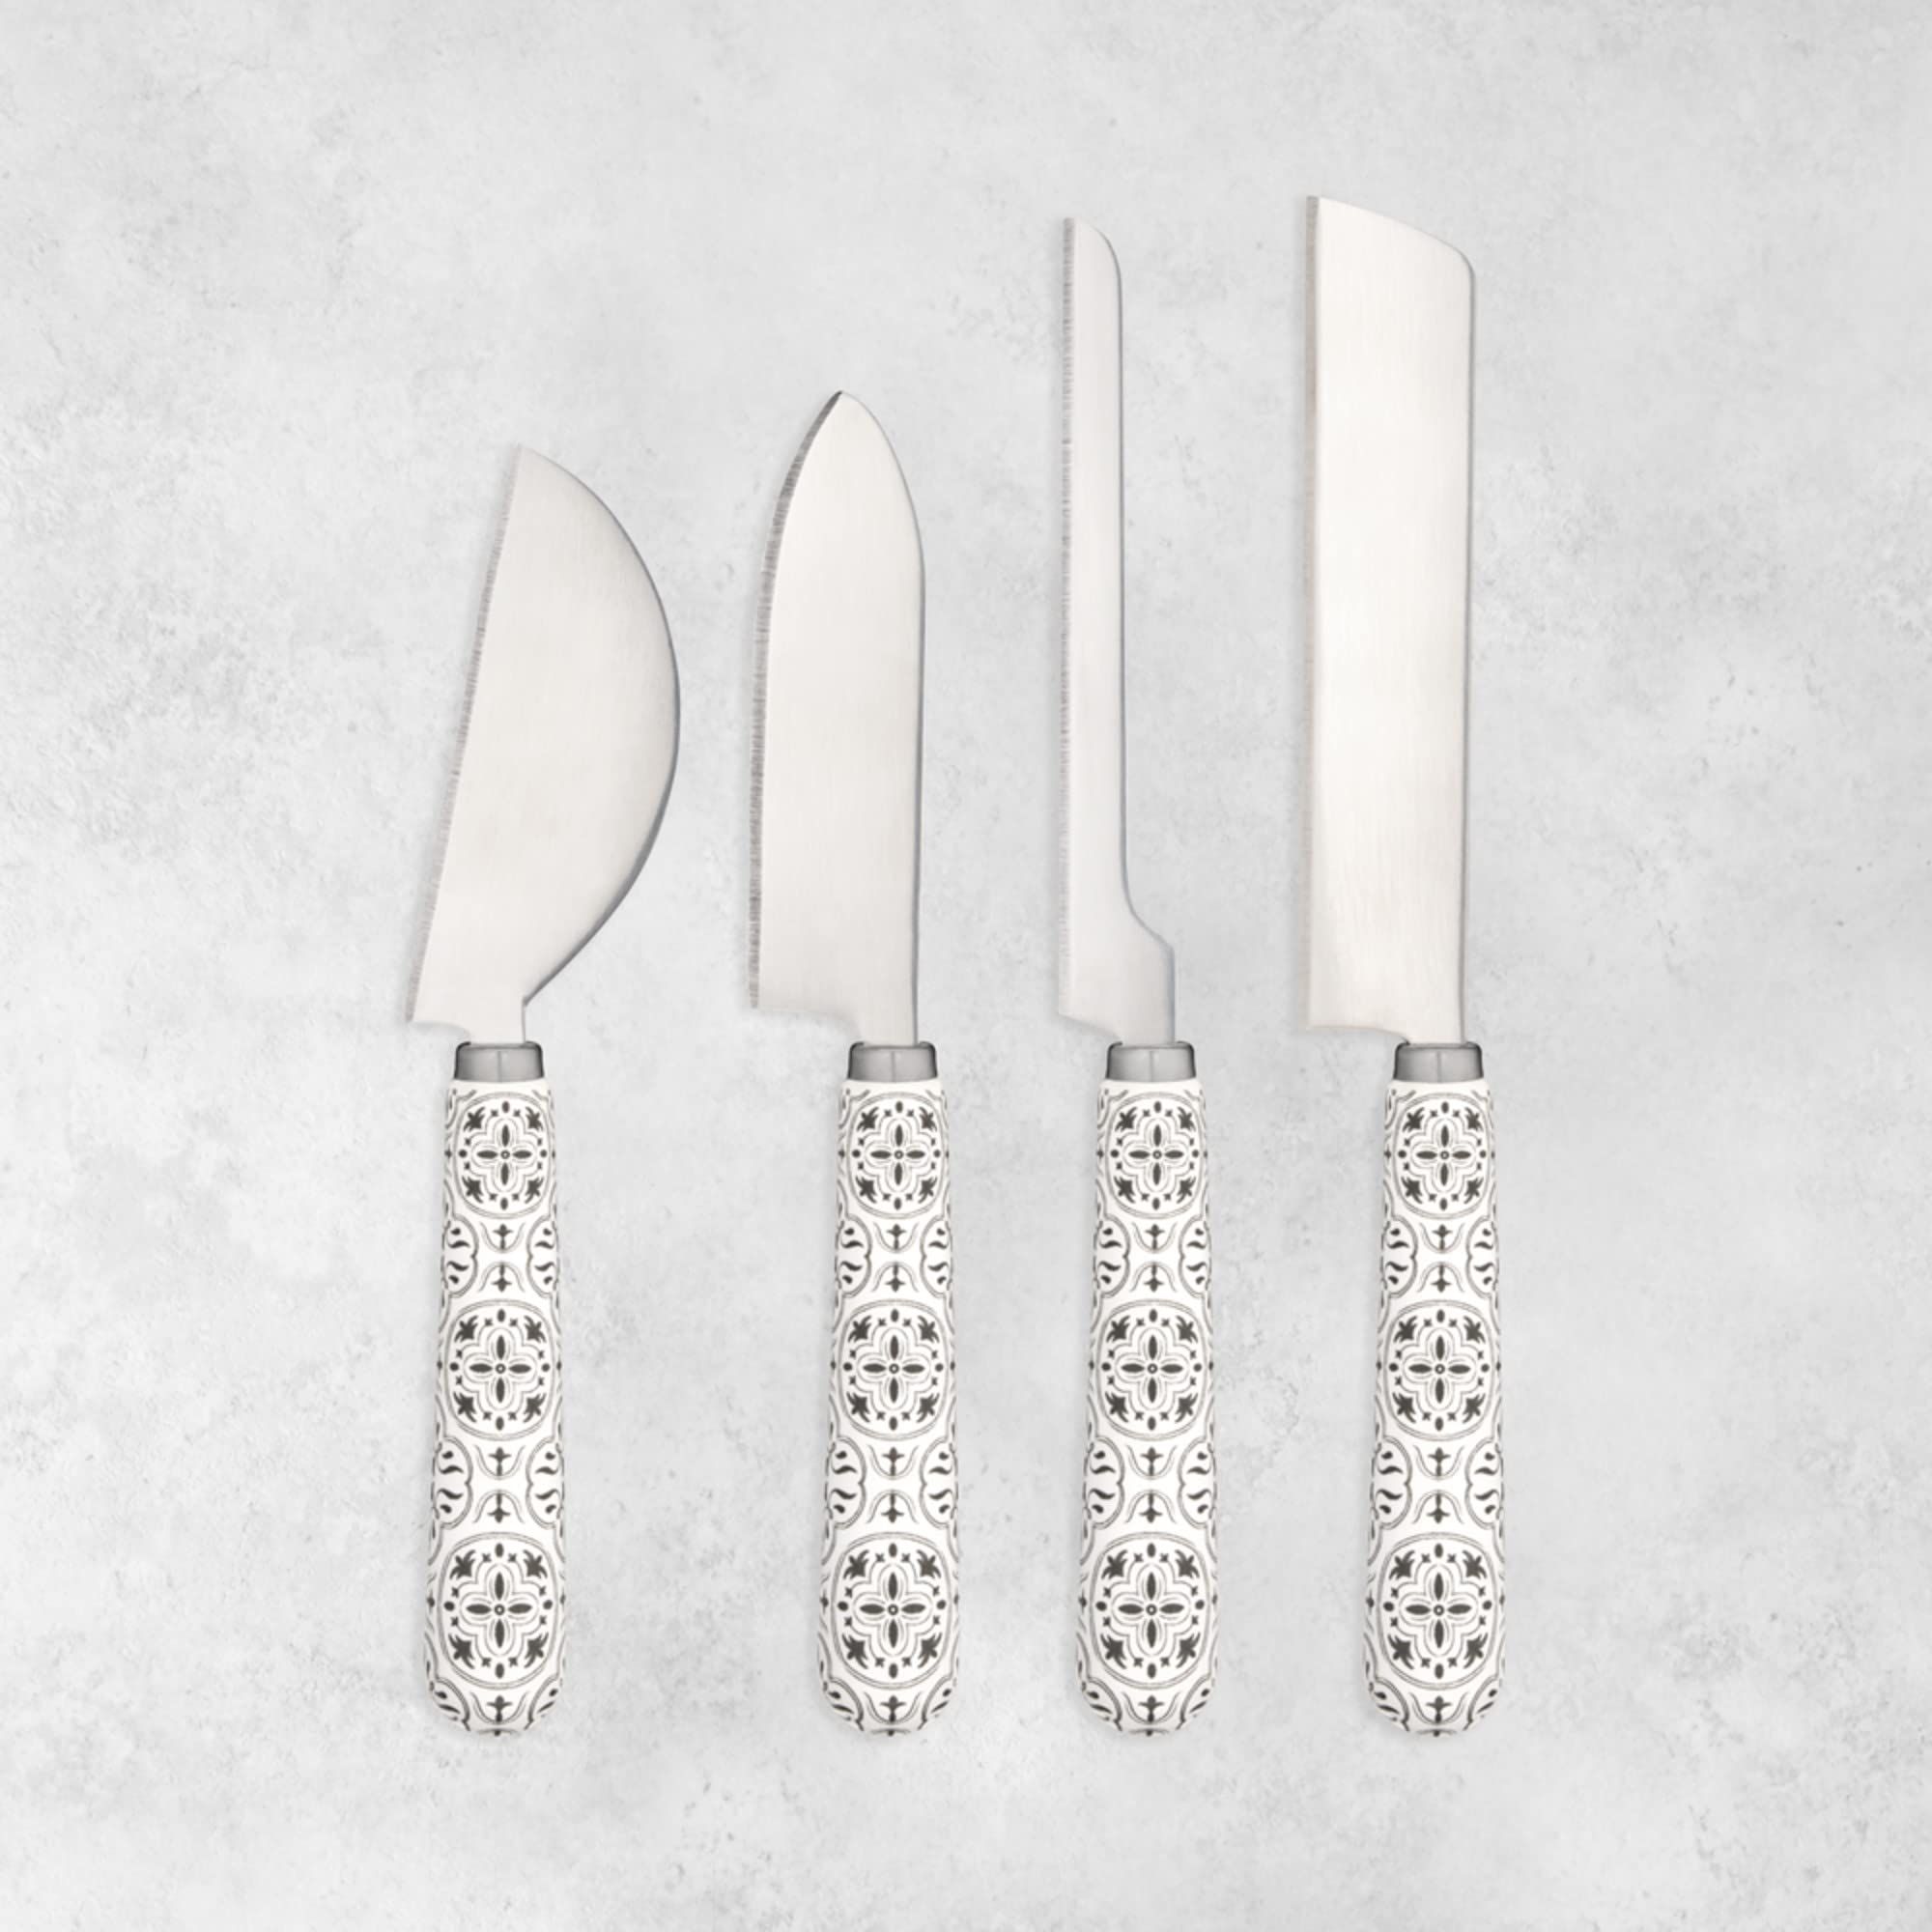 Twine 4 Piece Cheese Knives Set with Ceramic Tile Pattern Handles, For Hard and Soft Cheese, Bread a | Amazon (US)